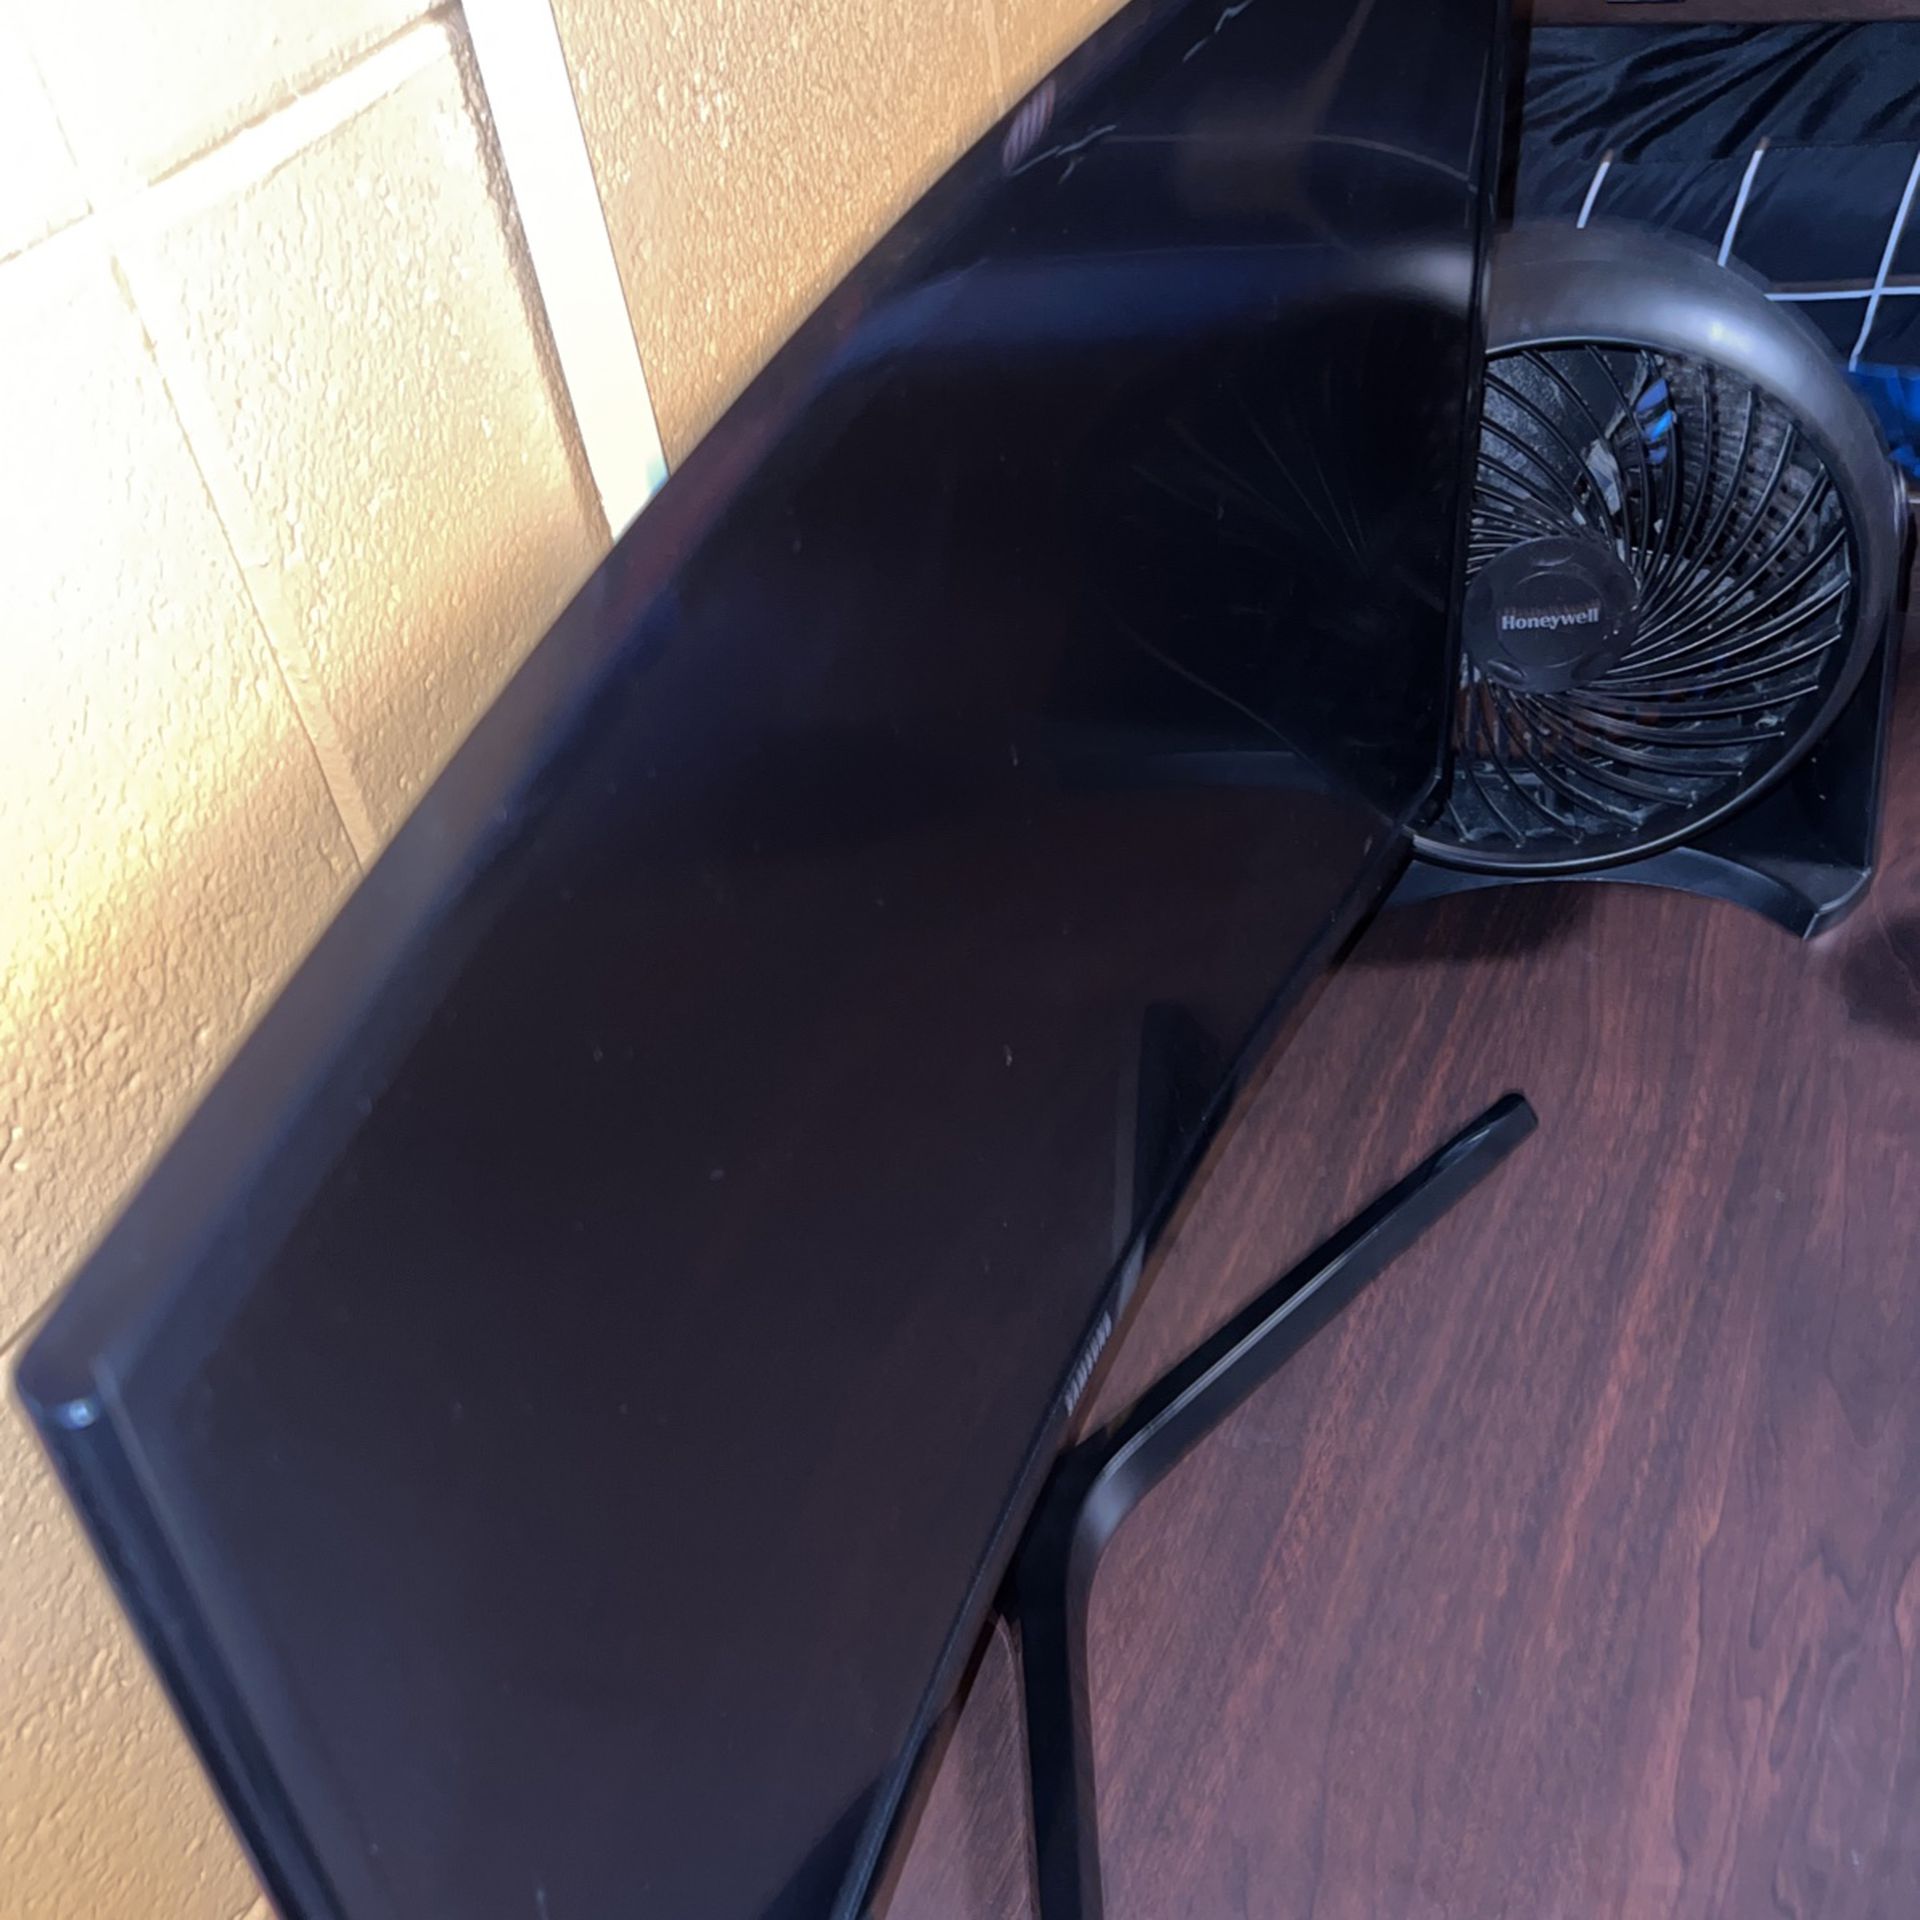 Samsung Curved Monitor 27’